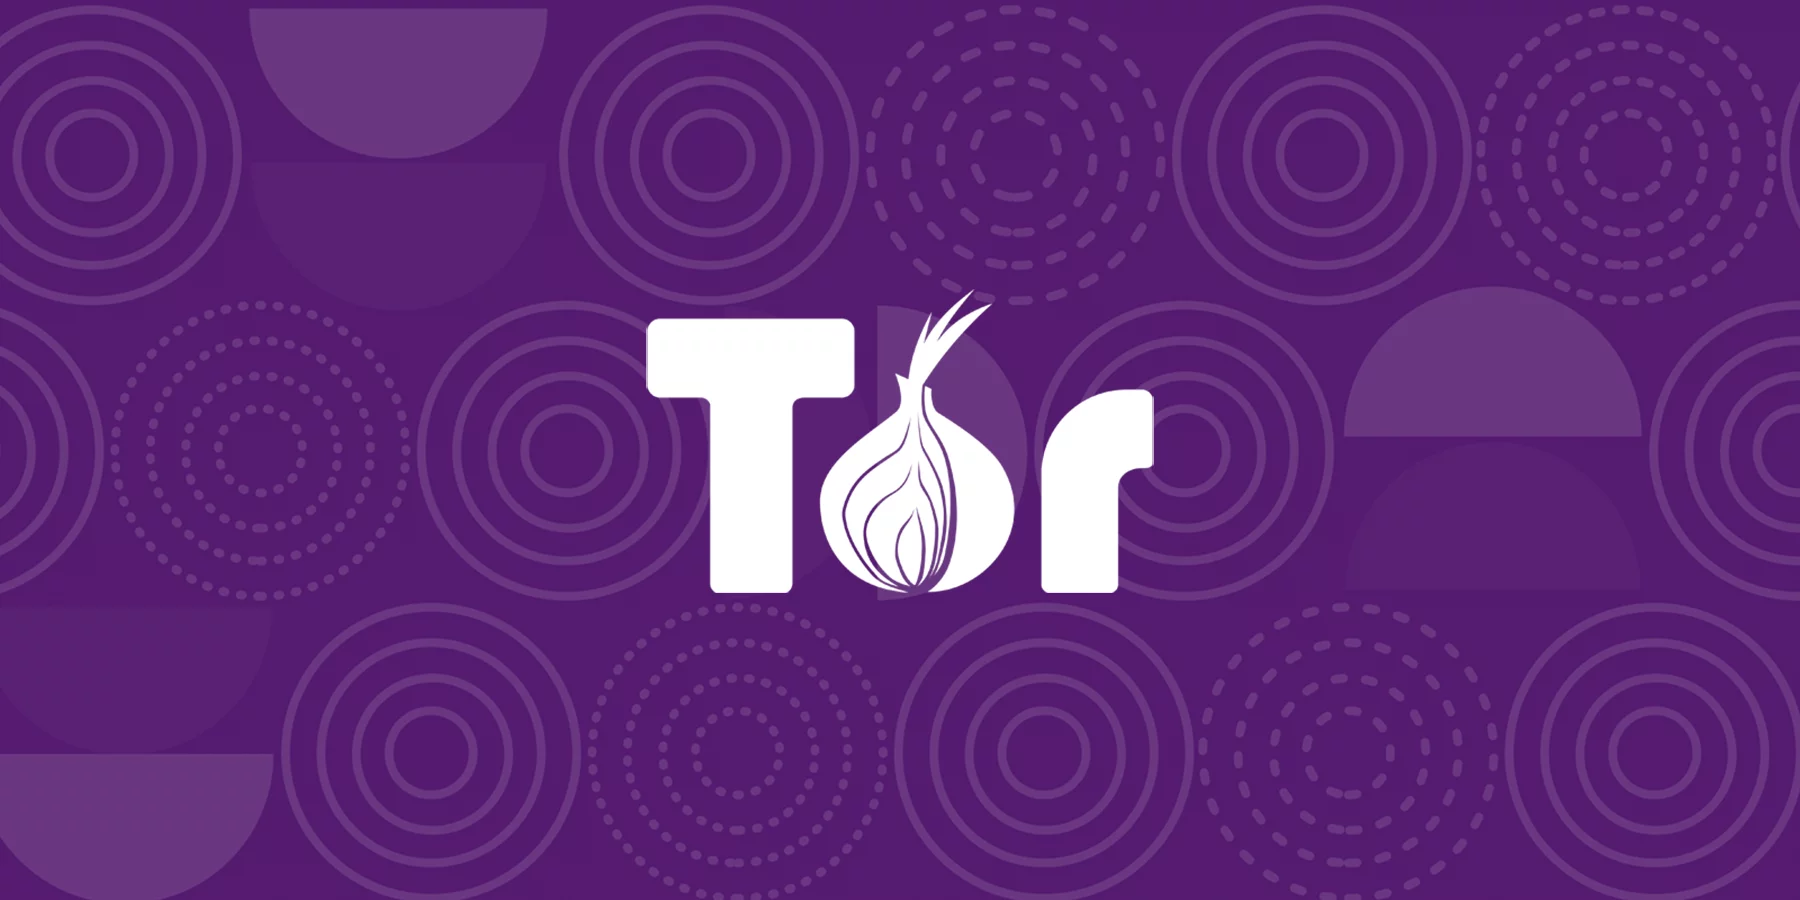 Tor Project Browser